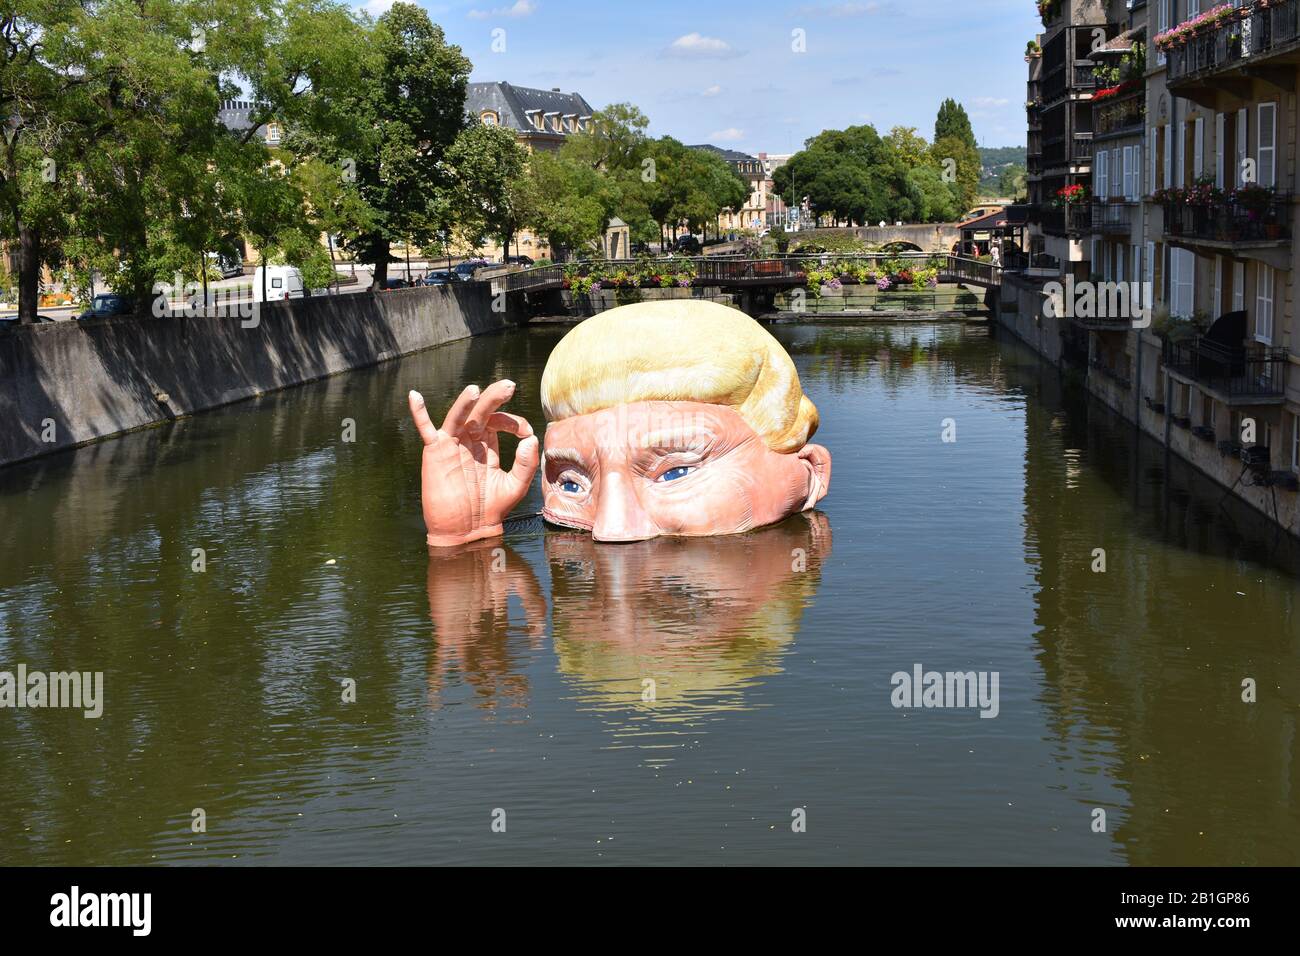 Donald Trump inflatable in the river at Metz, France, August 2019 Stock Photo